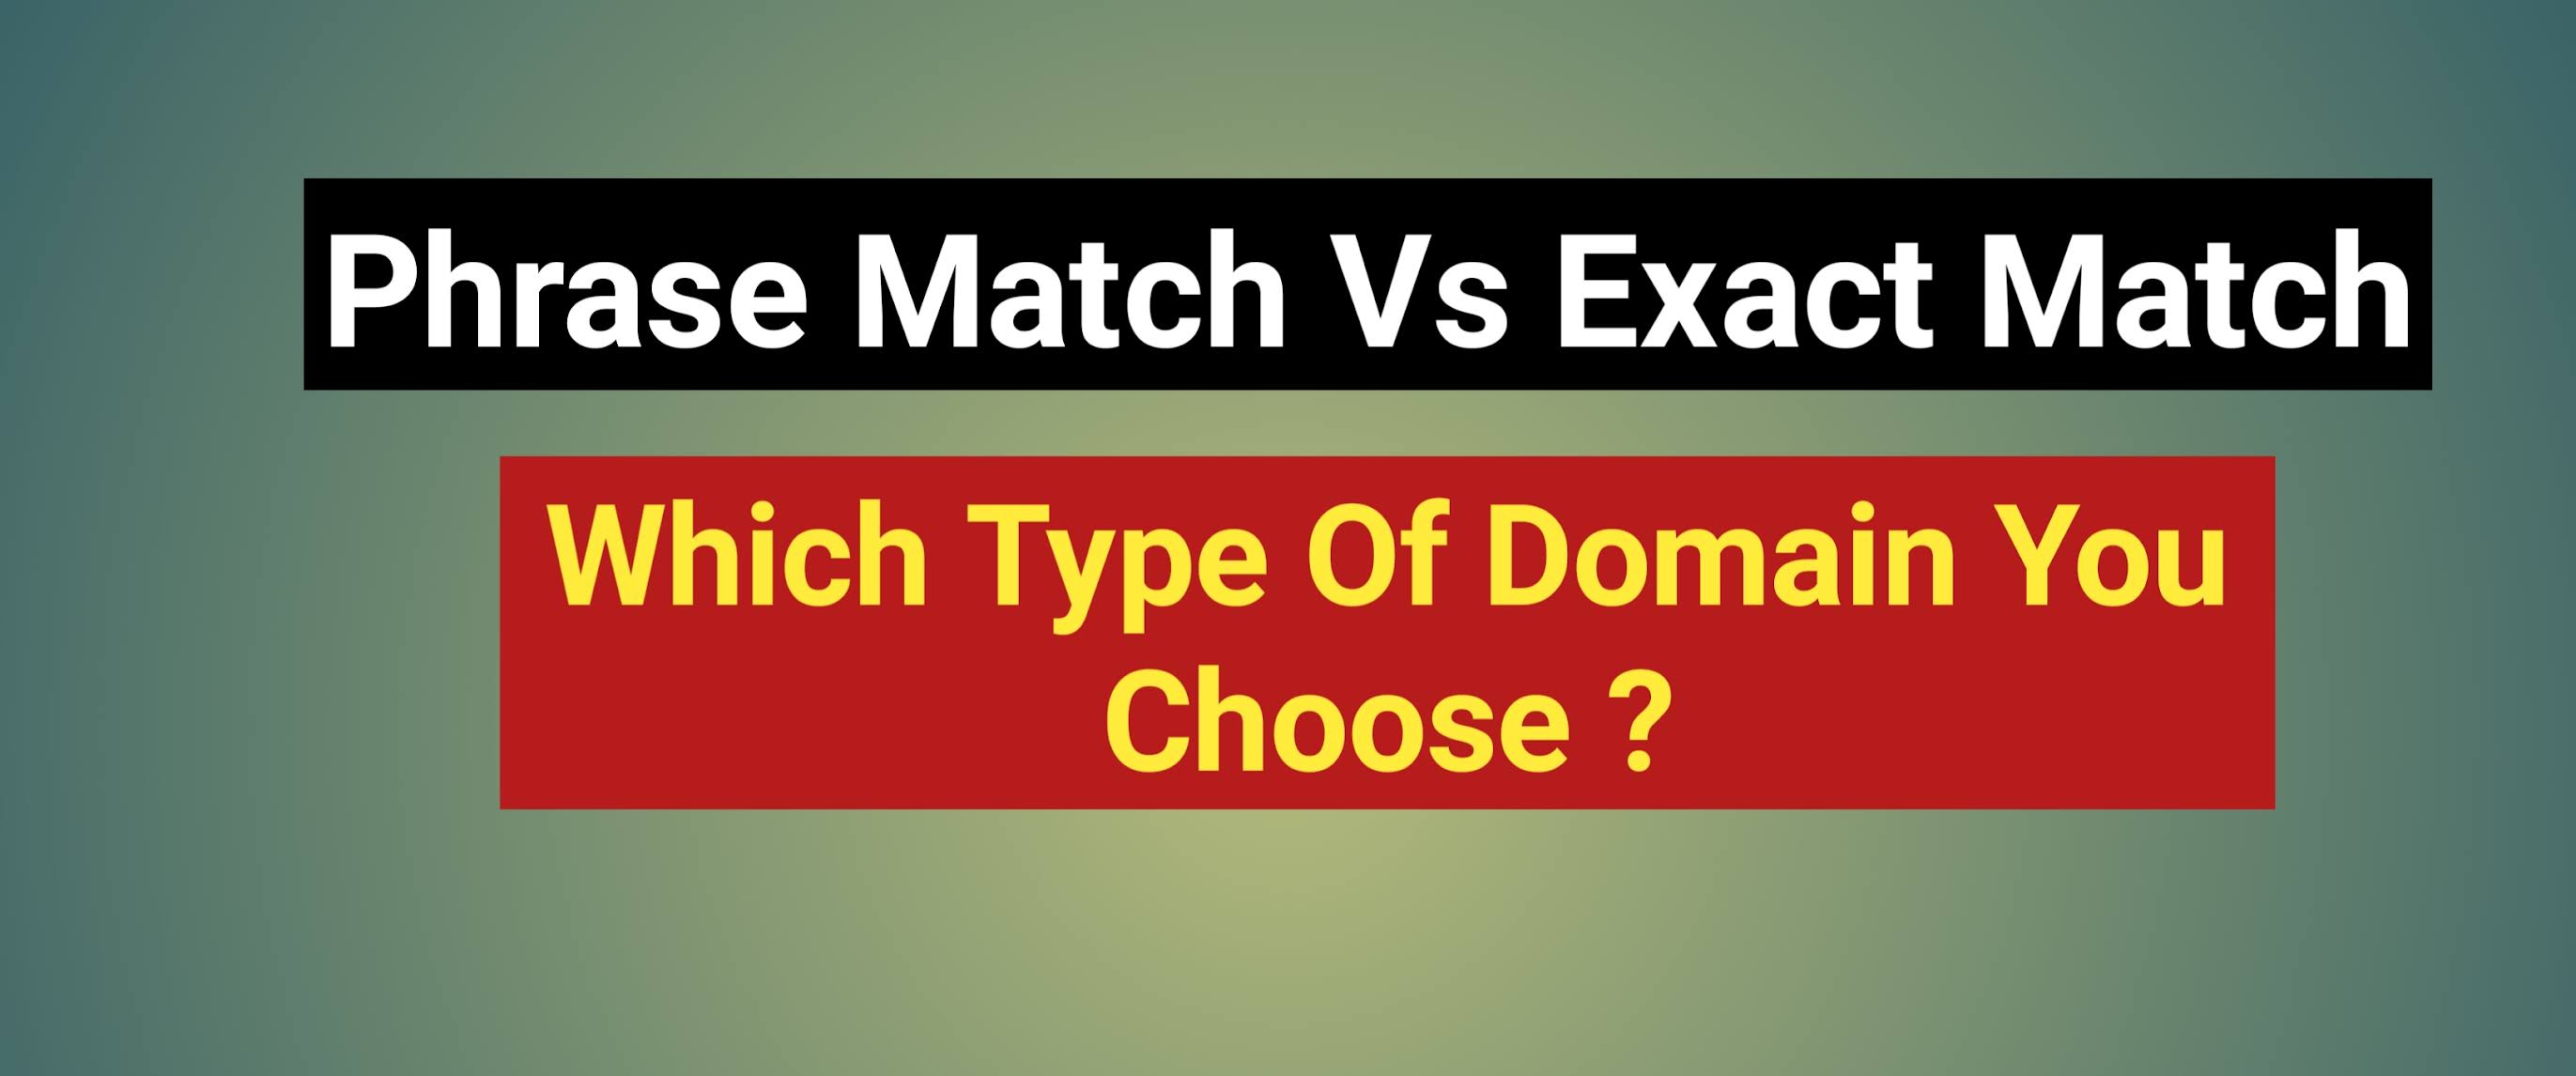 Phrase Match Vs Exact Match - Which Type Of Domain You Choose ?